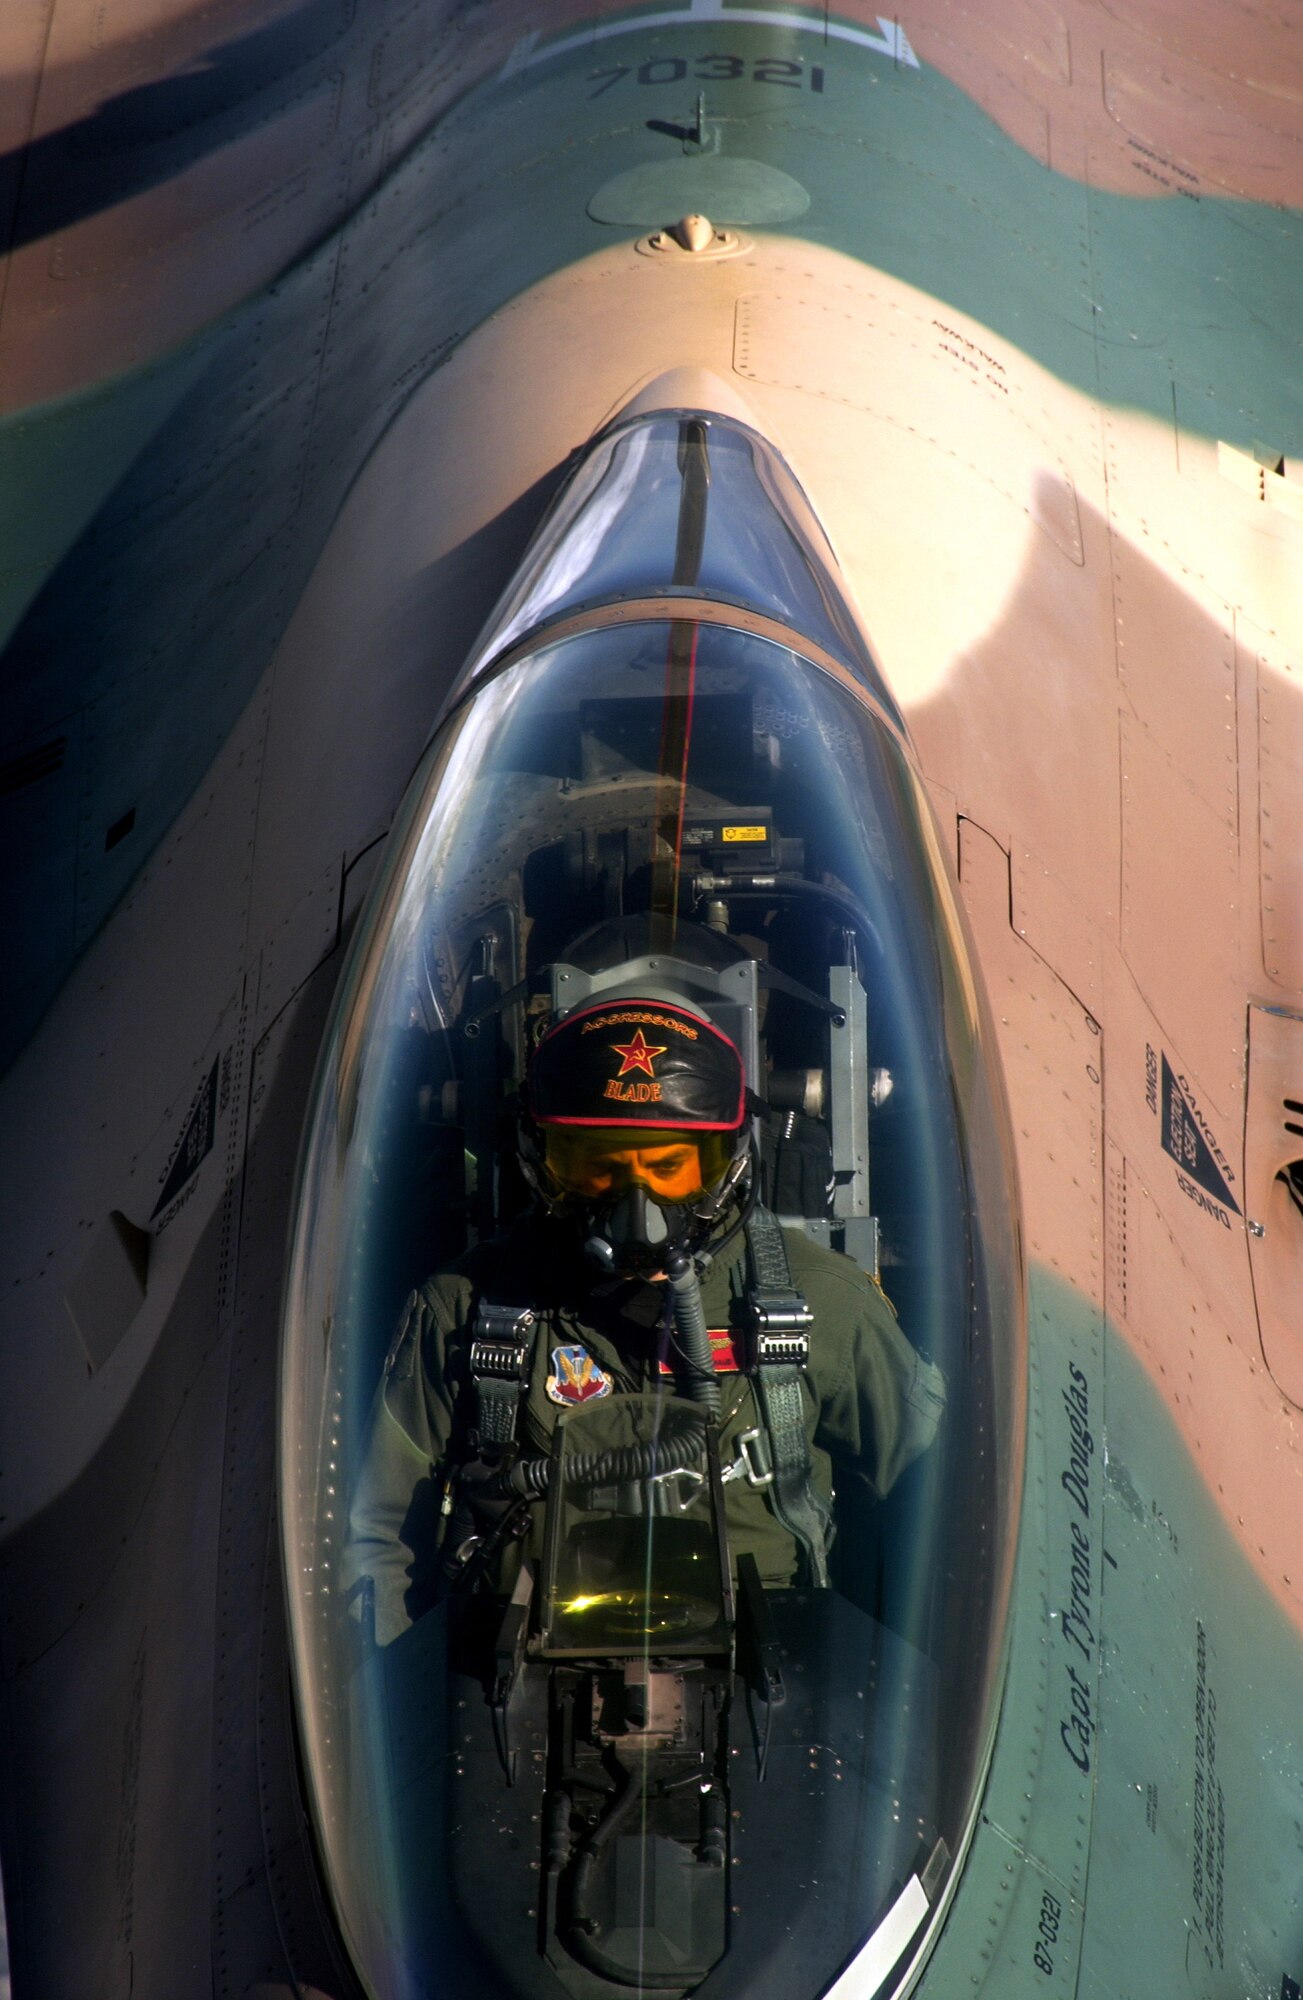 An F-16 Fighting Falcon from the 64th Aggressor Squadron at Nellis Air Force Base, Nev., approaches the boom on a KC-135 Stratotanker to refuel Oct. 19 during Red Flag 07-1. Red Flag tests aircrew warfighting skills in realistic combat situations. The aircraft fly missions at the nearby Nevada Test and Training Range where they simulate an air war. (U.S. Air Force photo/Master Sgt. Kevin J. Gruenwald)





